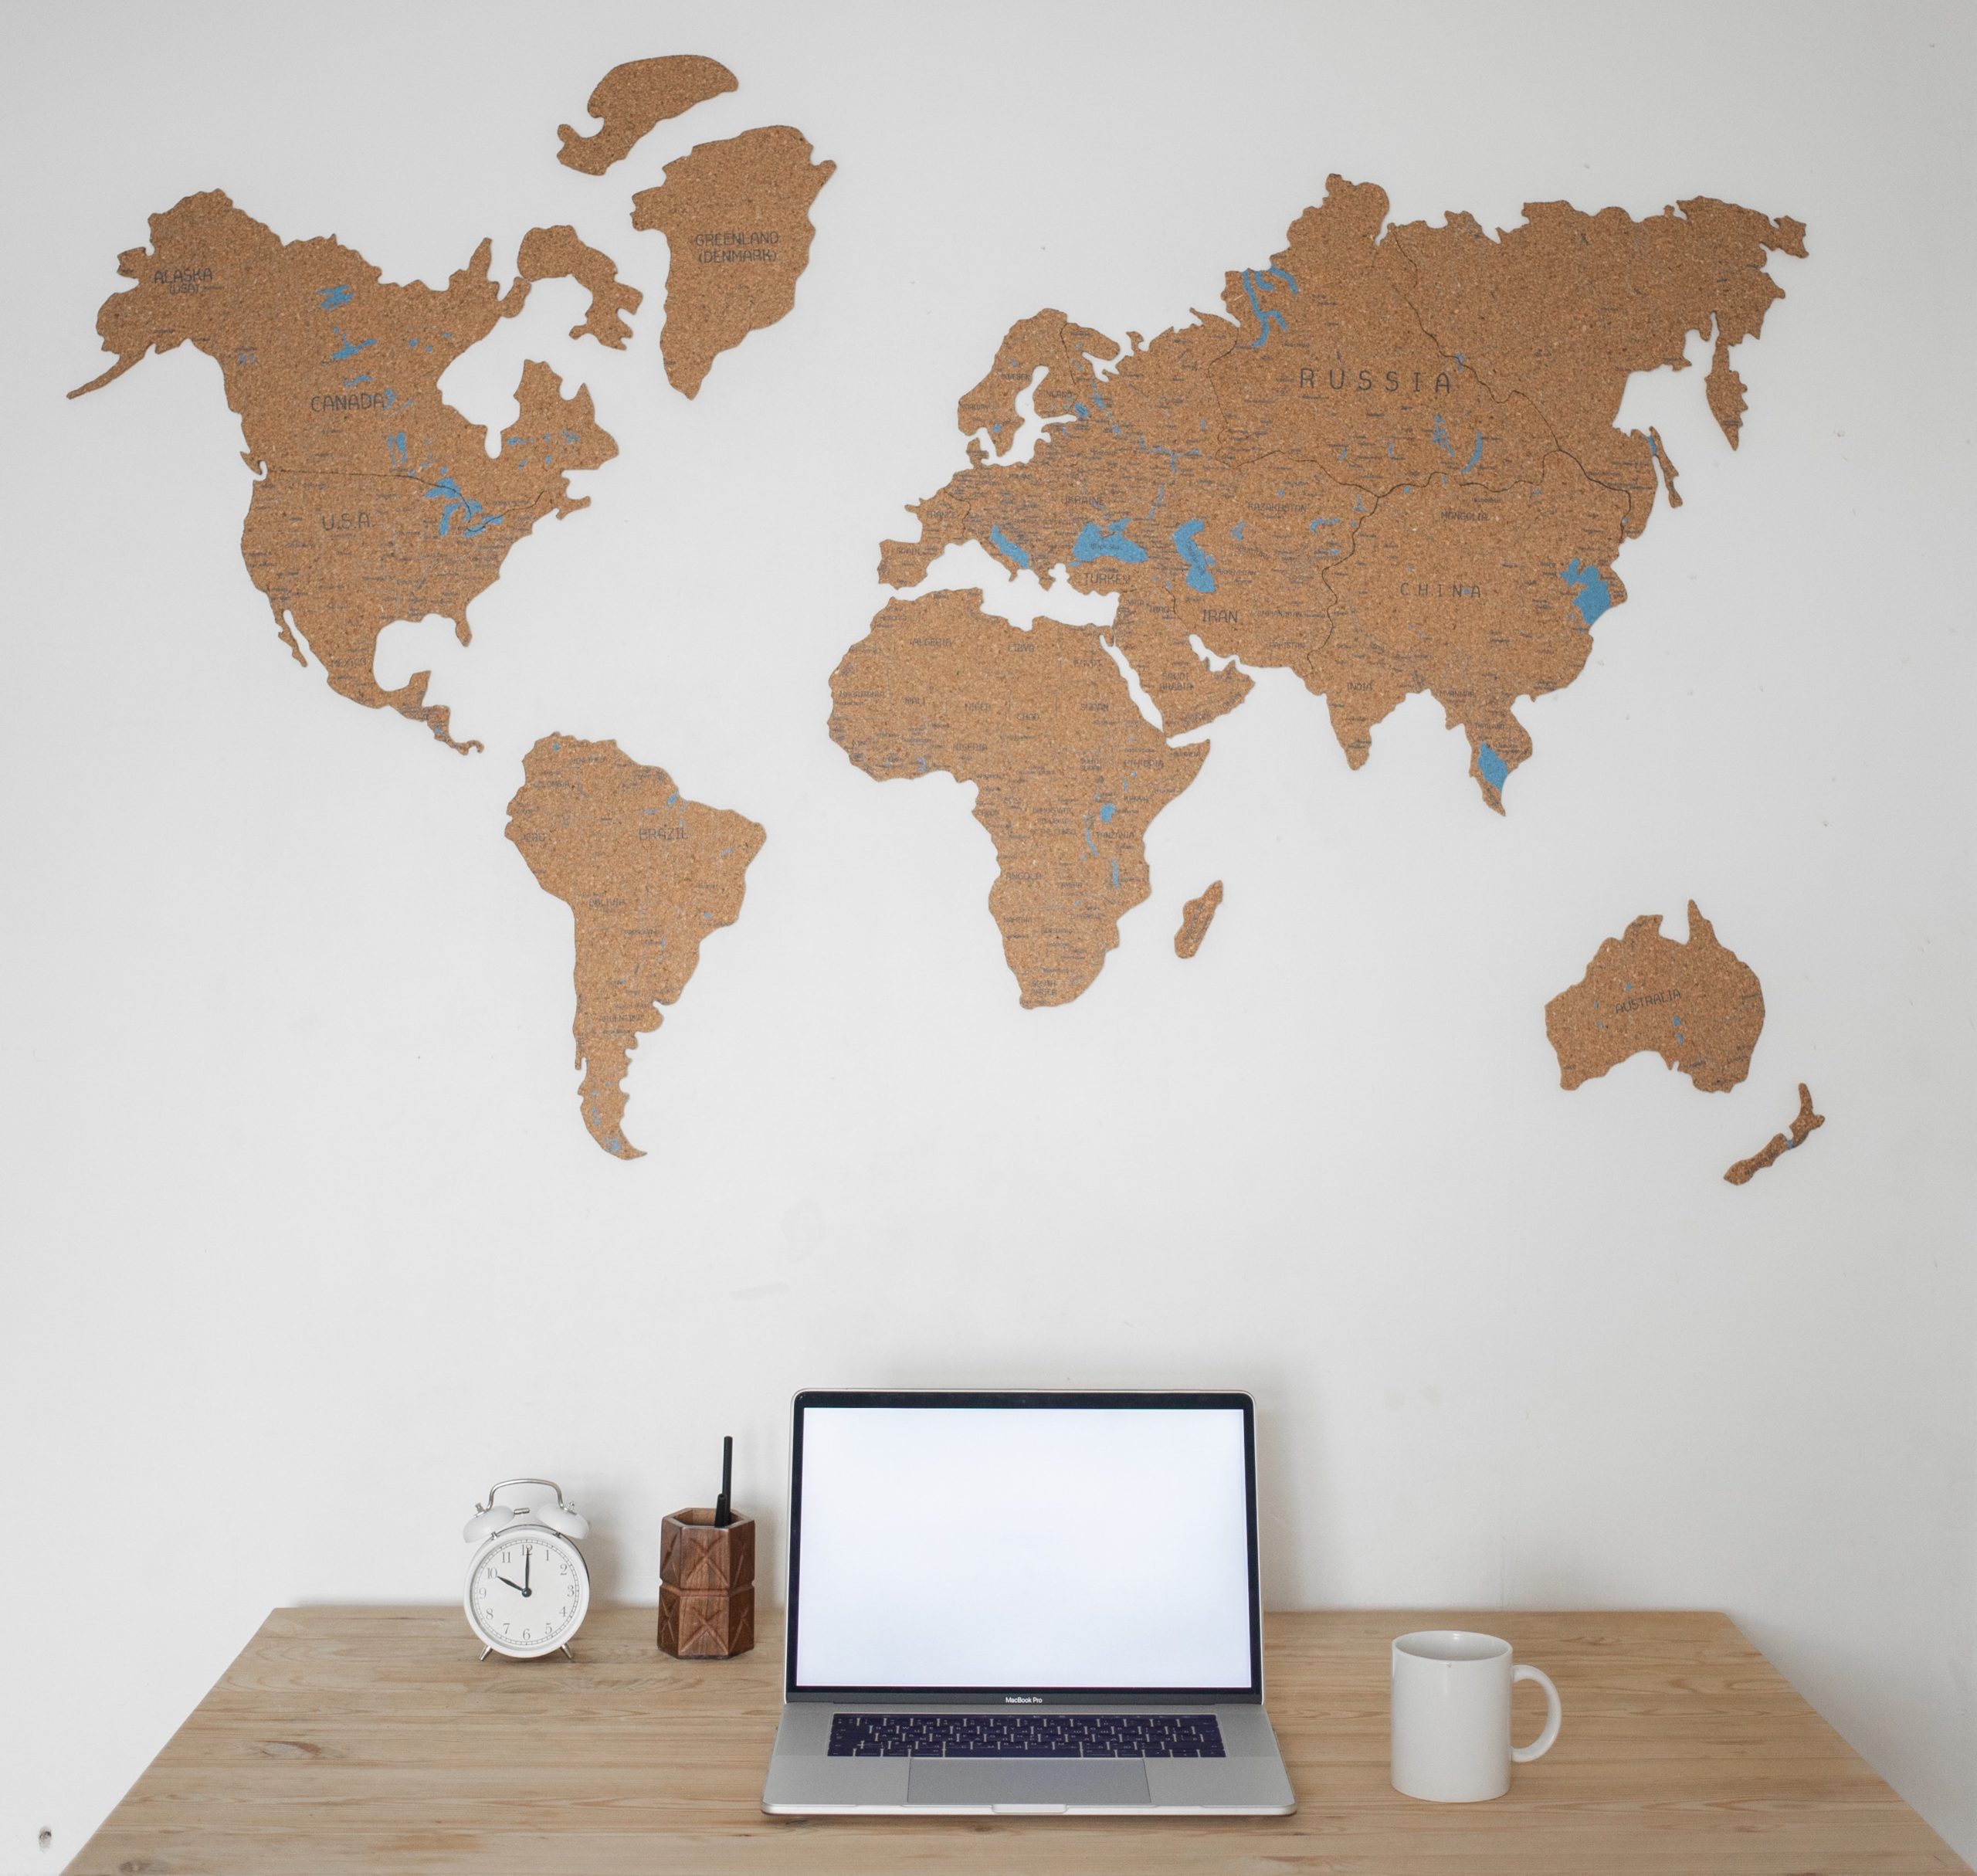 A world map on the wall